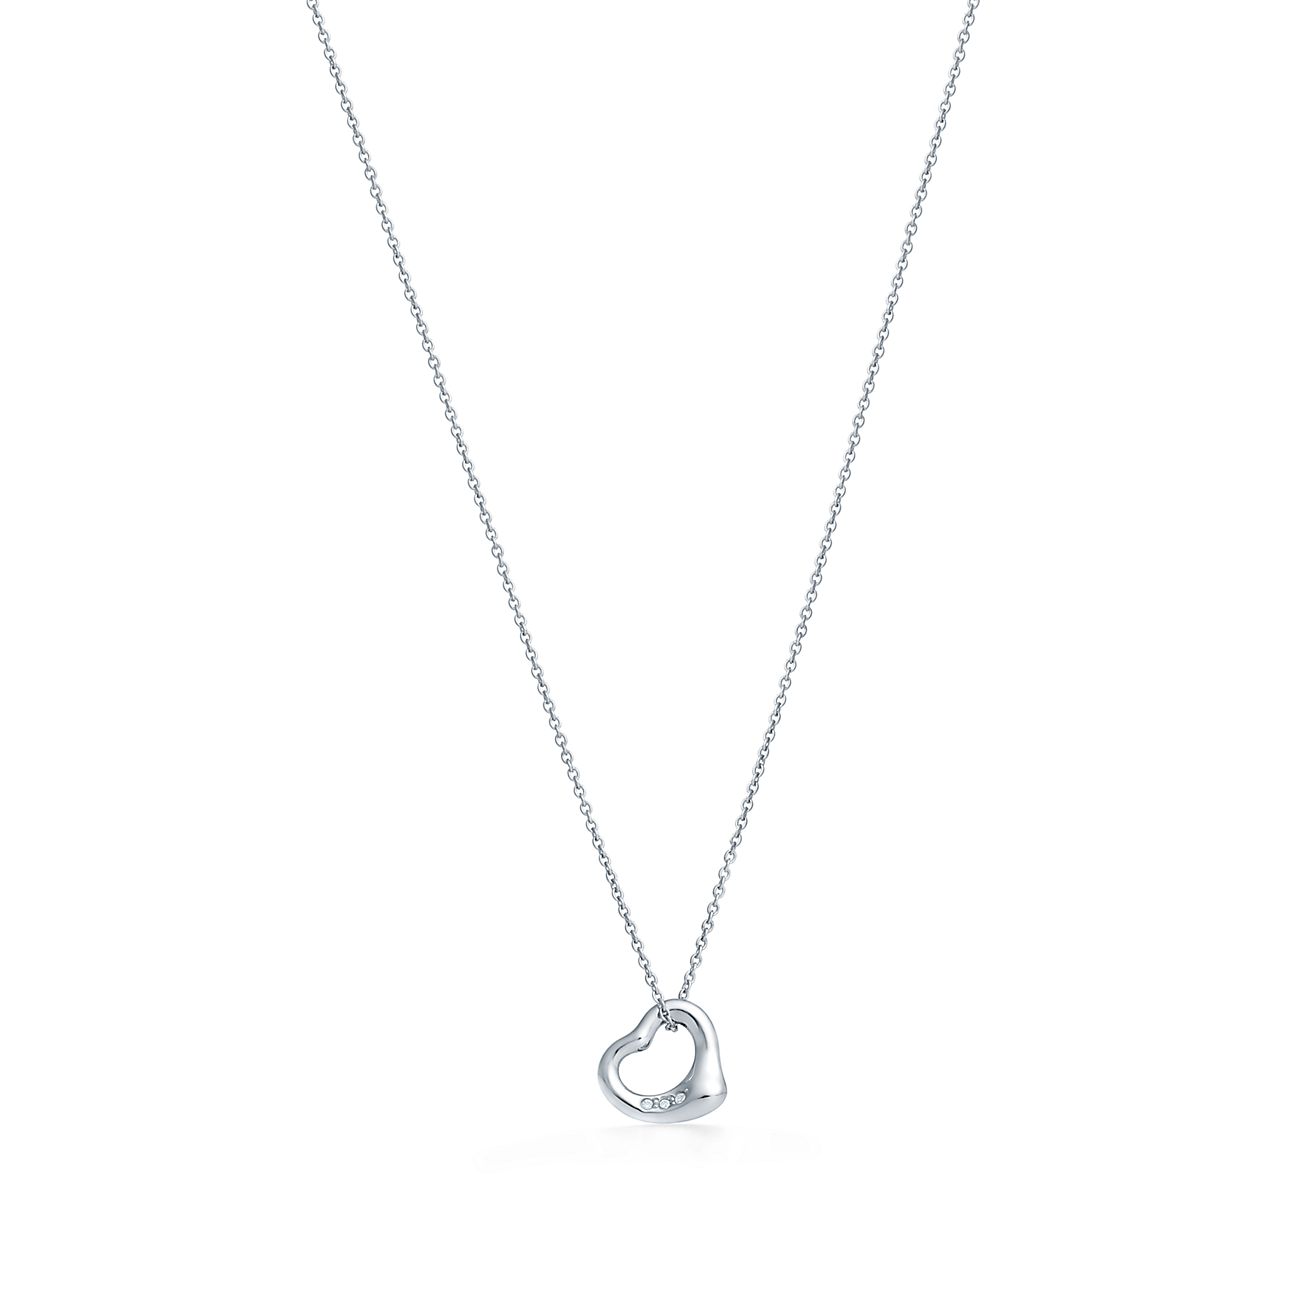 Elsa Peretti Diamonds by The Yard Open Heart Necklace in Sterling Silver